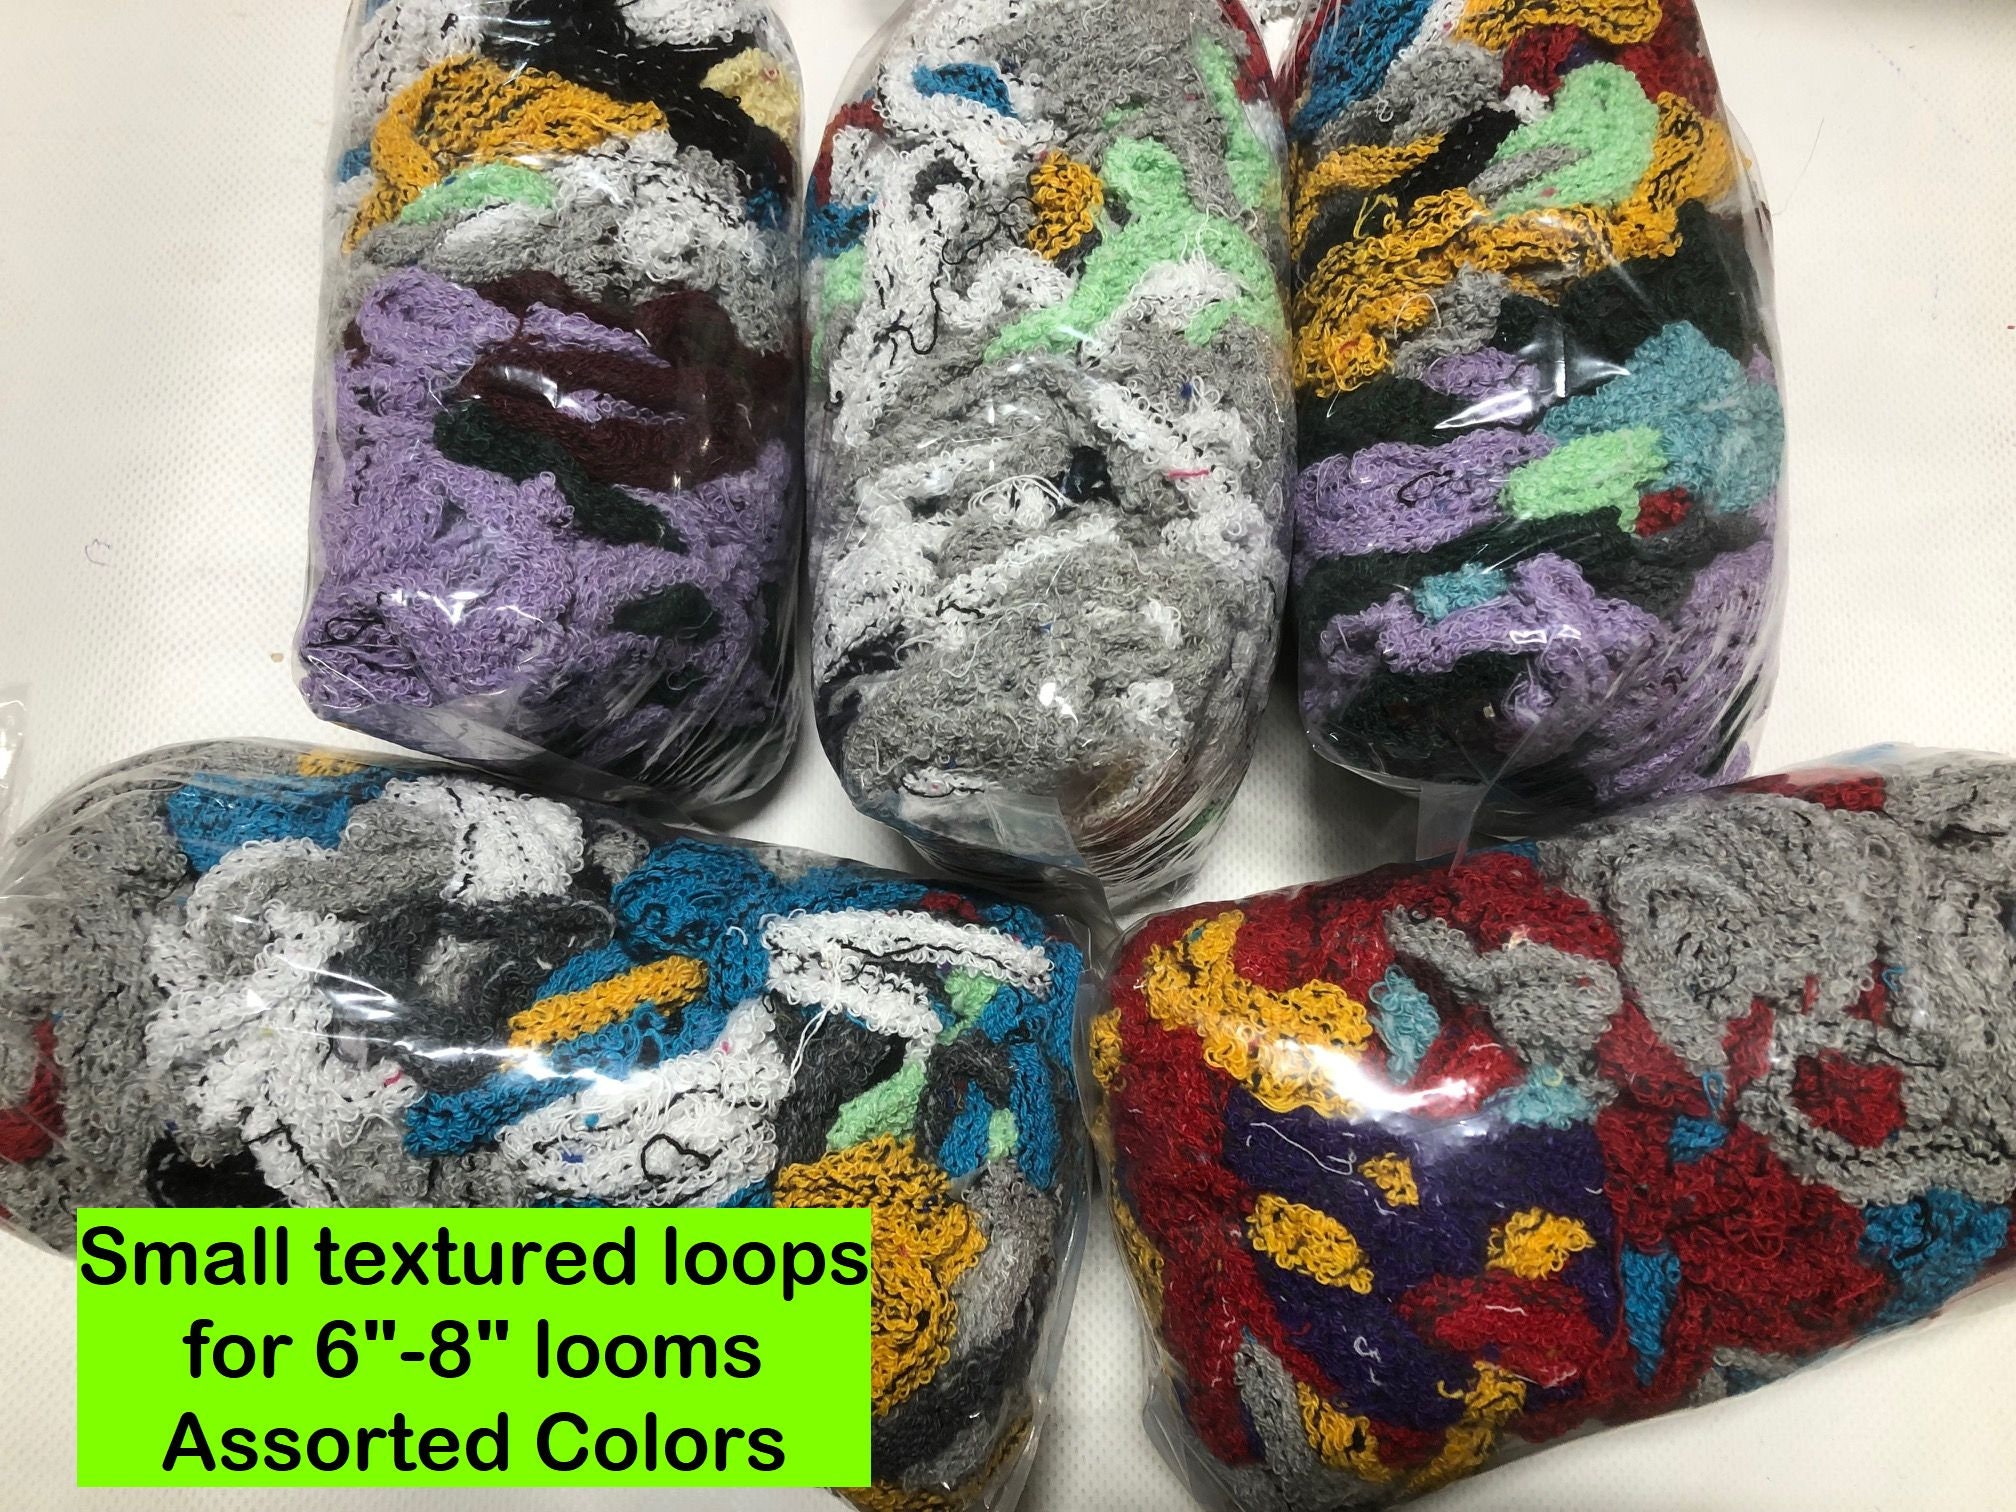 Potholder Jumbo 10 Wood Loom Kit, 1.5lbs Assorted Colors Cotton Loops,  U.S.A. Made, Craft Supplies, Sock Loopers, Weaving, Rugs, Recycling -   Denmark